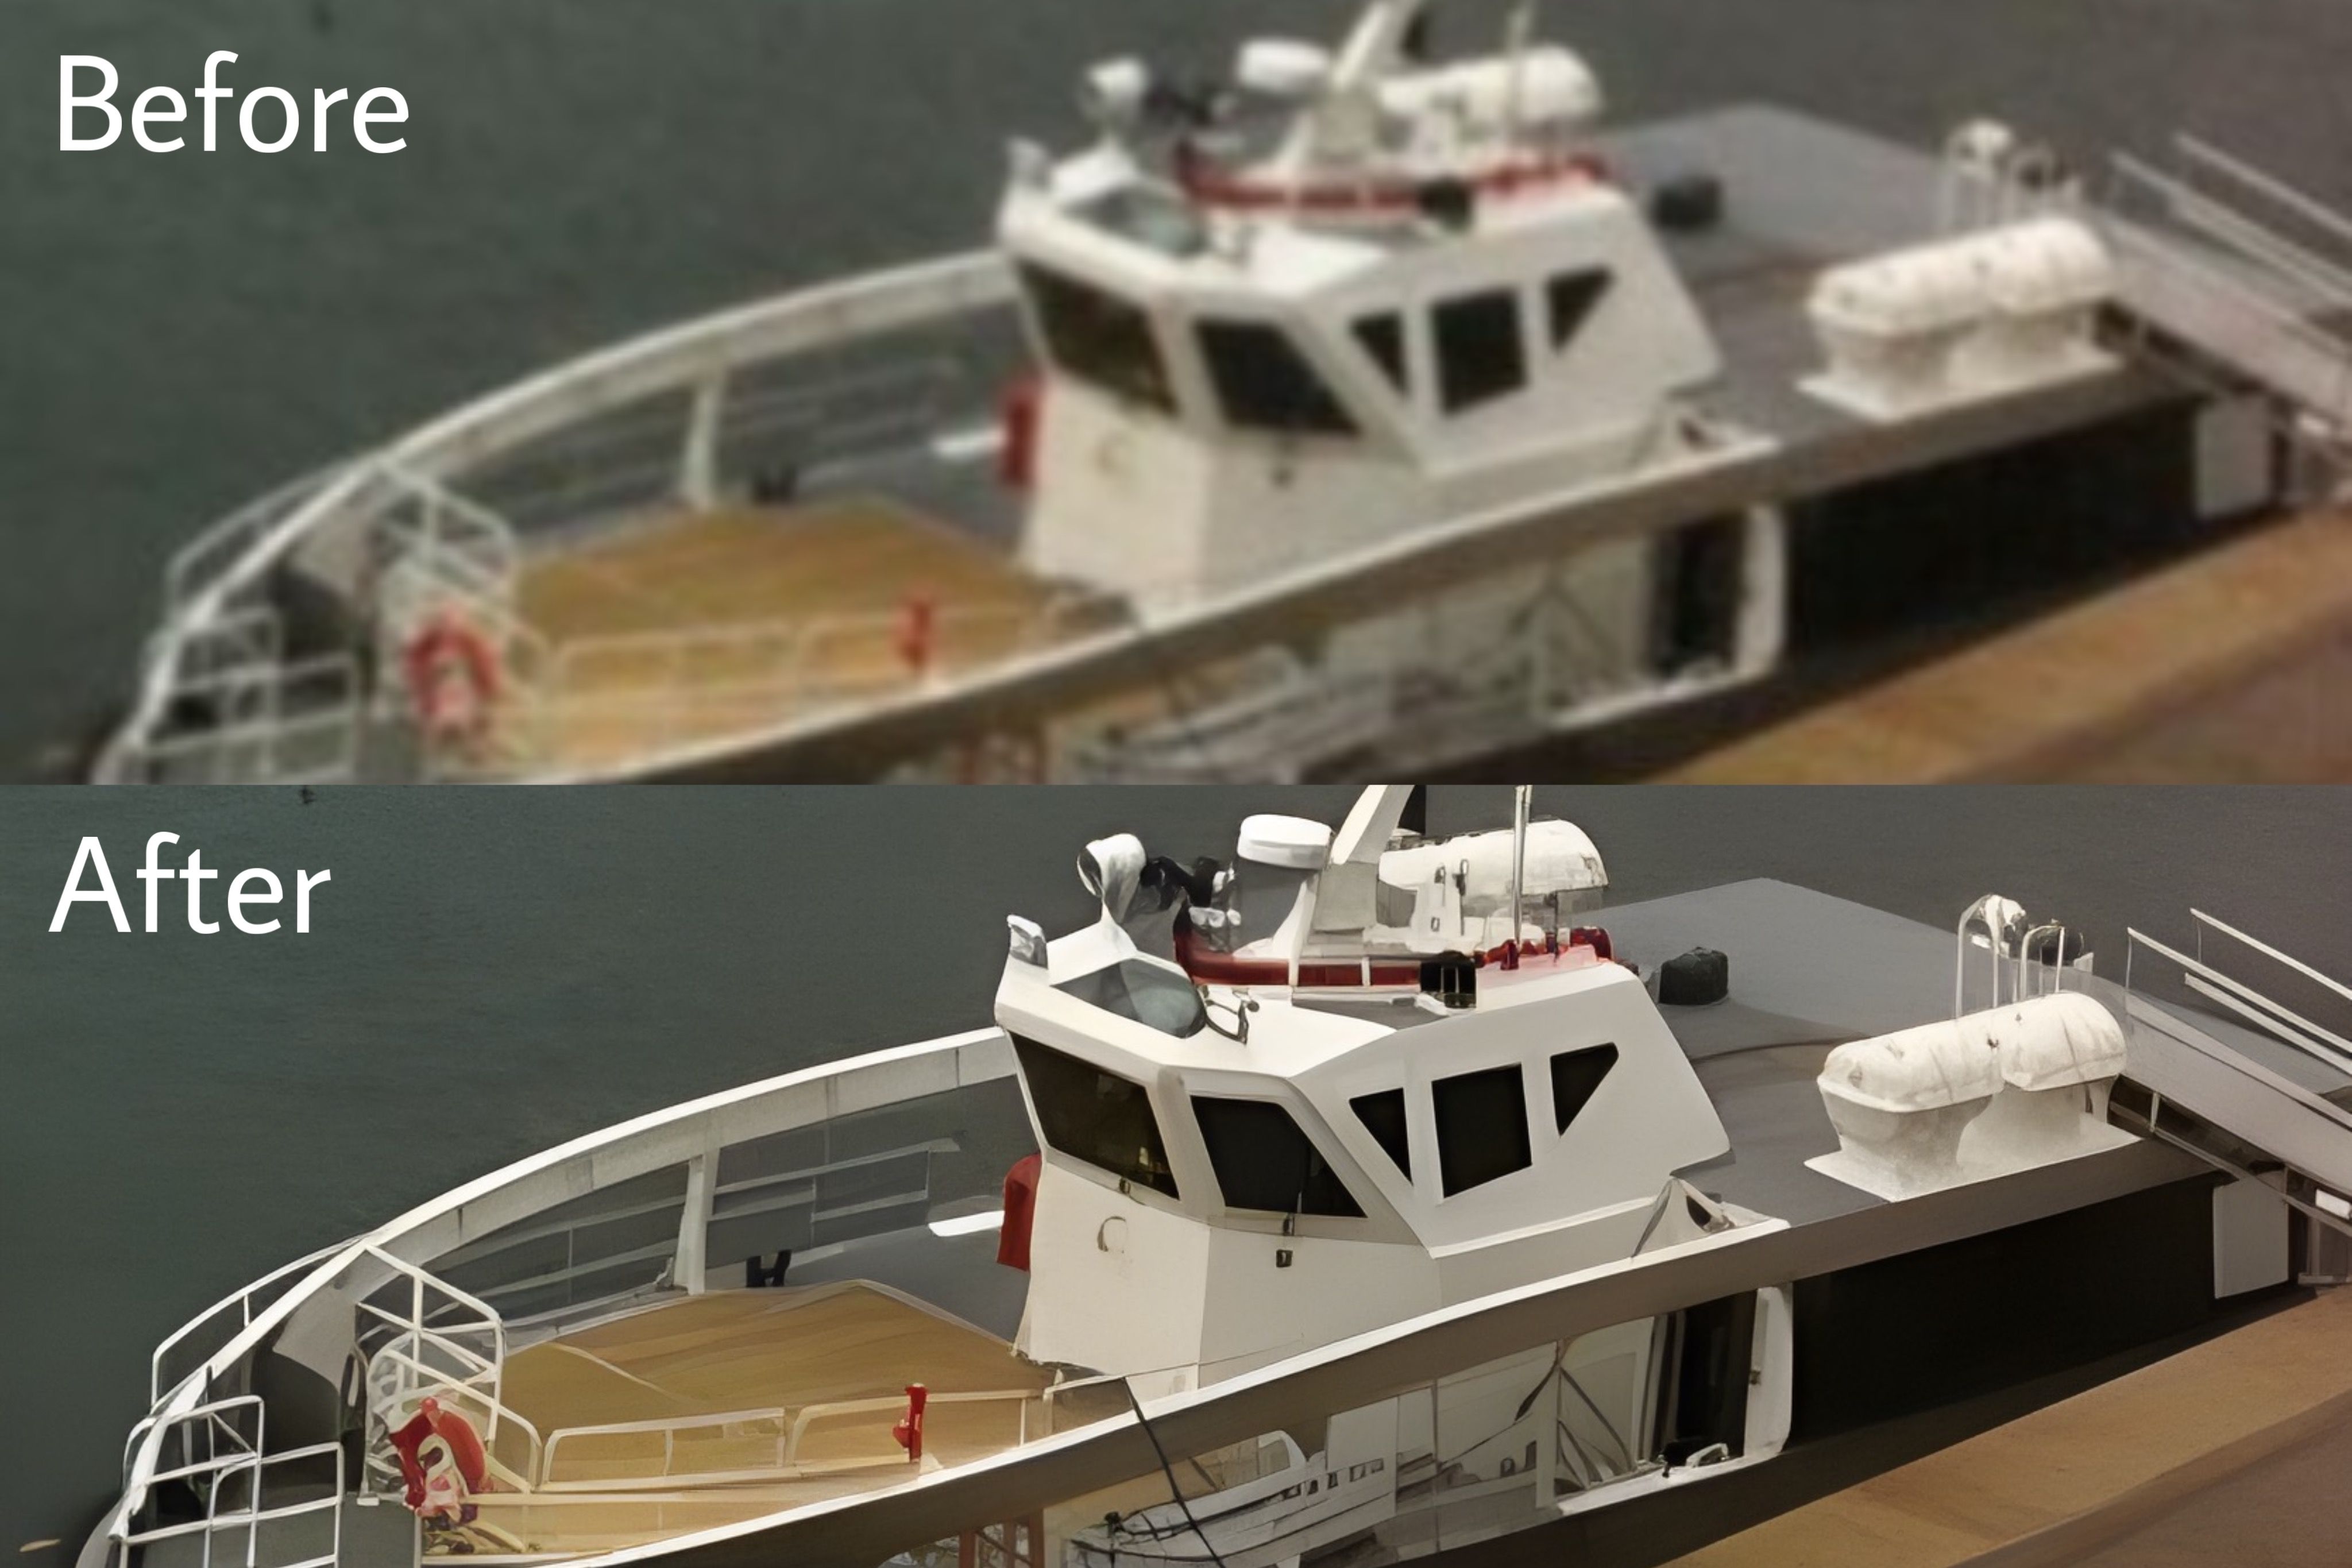 Before and after comparison of a boat using the AI tool